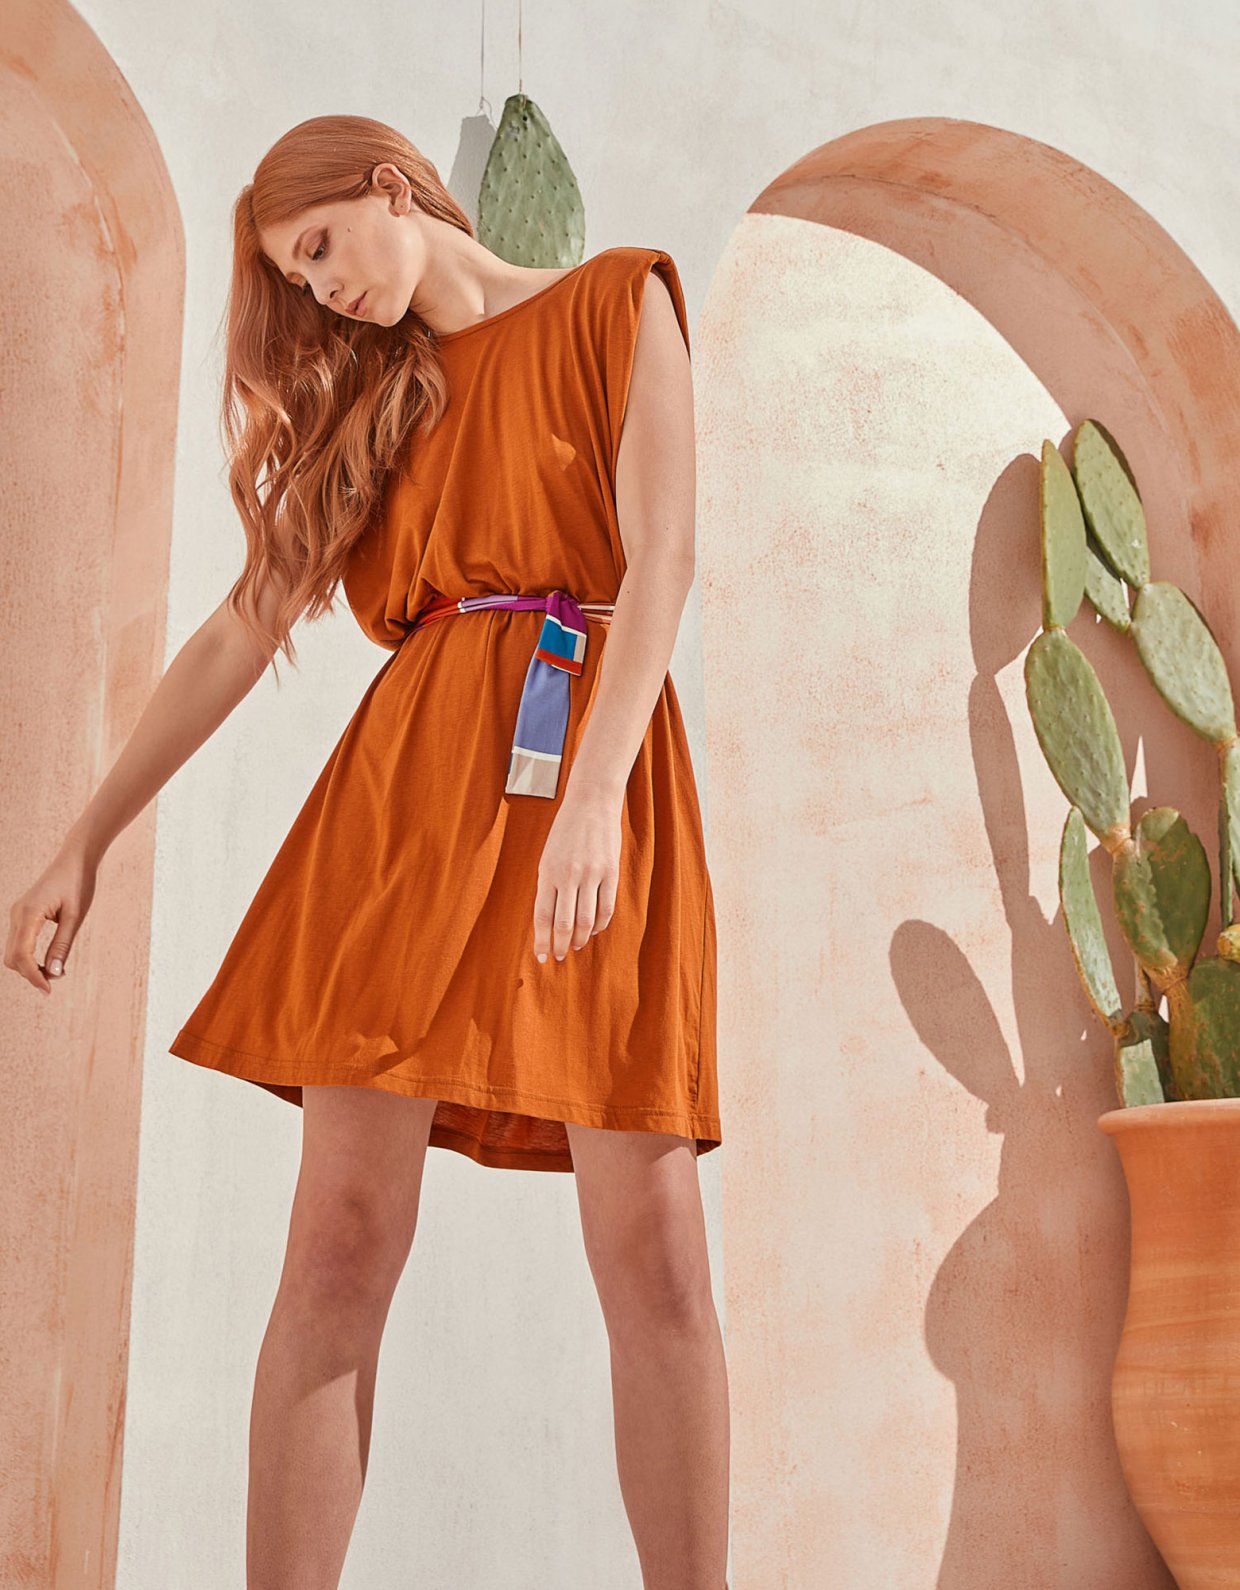 The Knl's Jaunt dress toffee